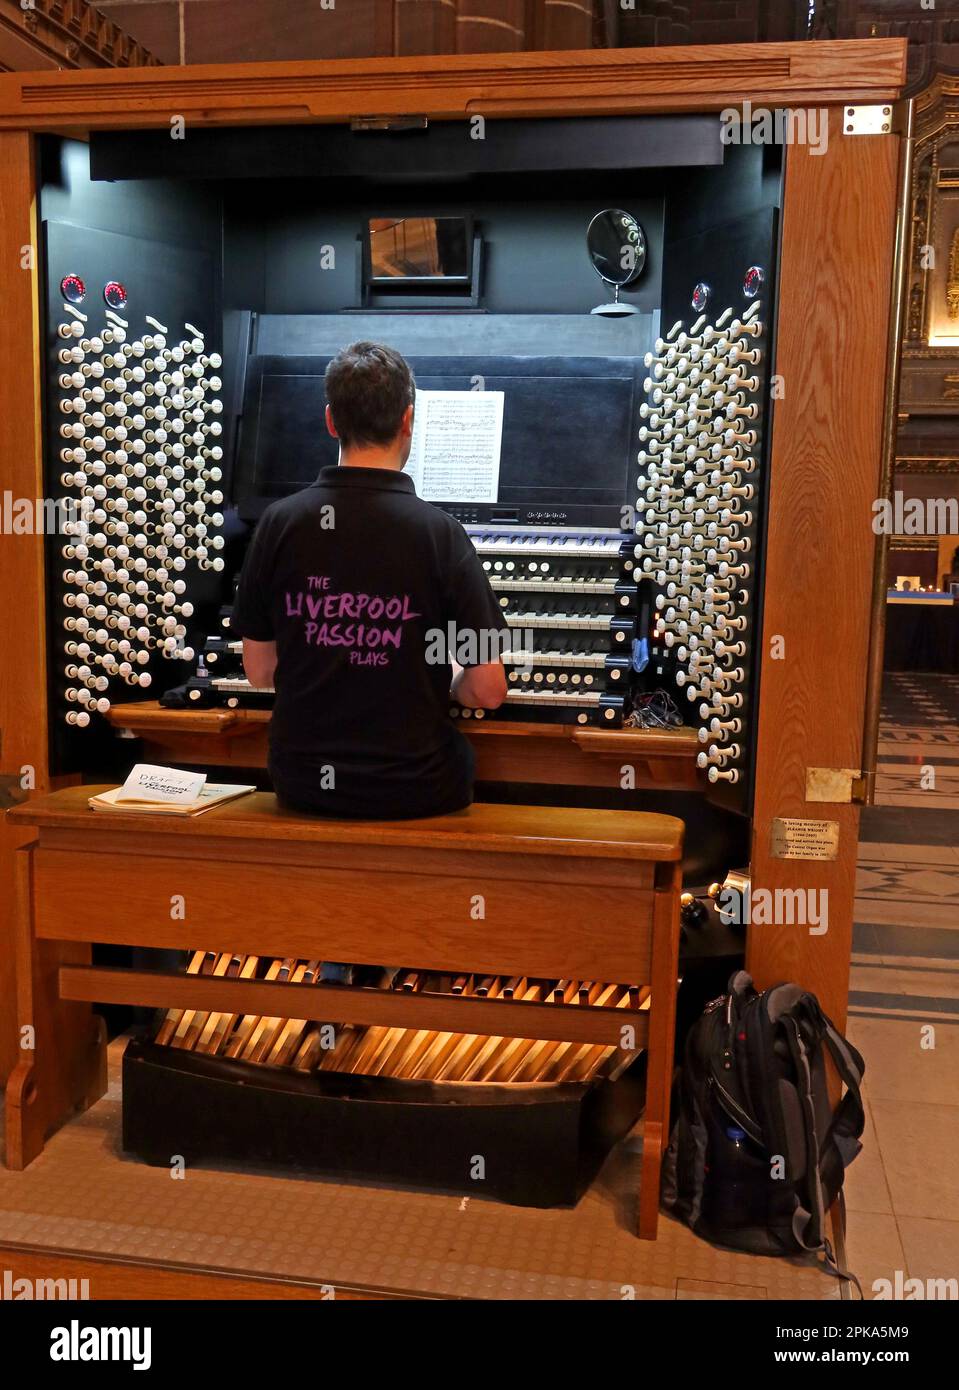 Organ player, at the Liverpool Passion Plays 2023, at Anglican Cathedral, St James Mt, St James Rd, Liverpool, Merseyside, England, UK, L1 7AZ Stock Photo